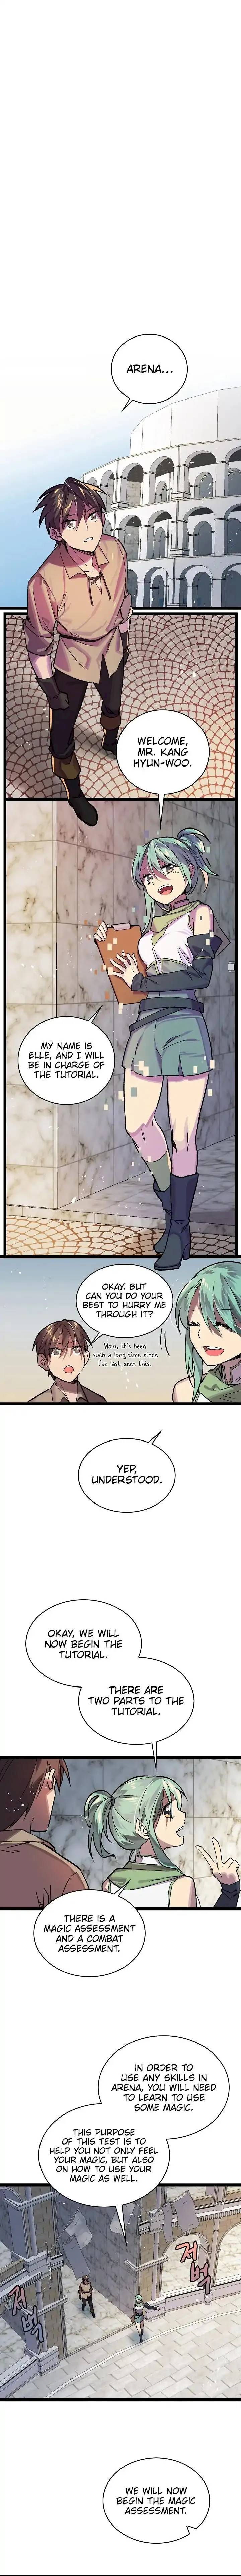 Ranker’s Return - Chapter 3 Page 13